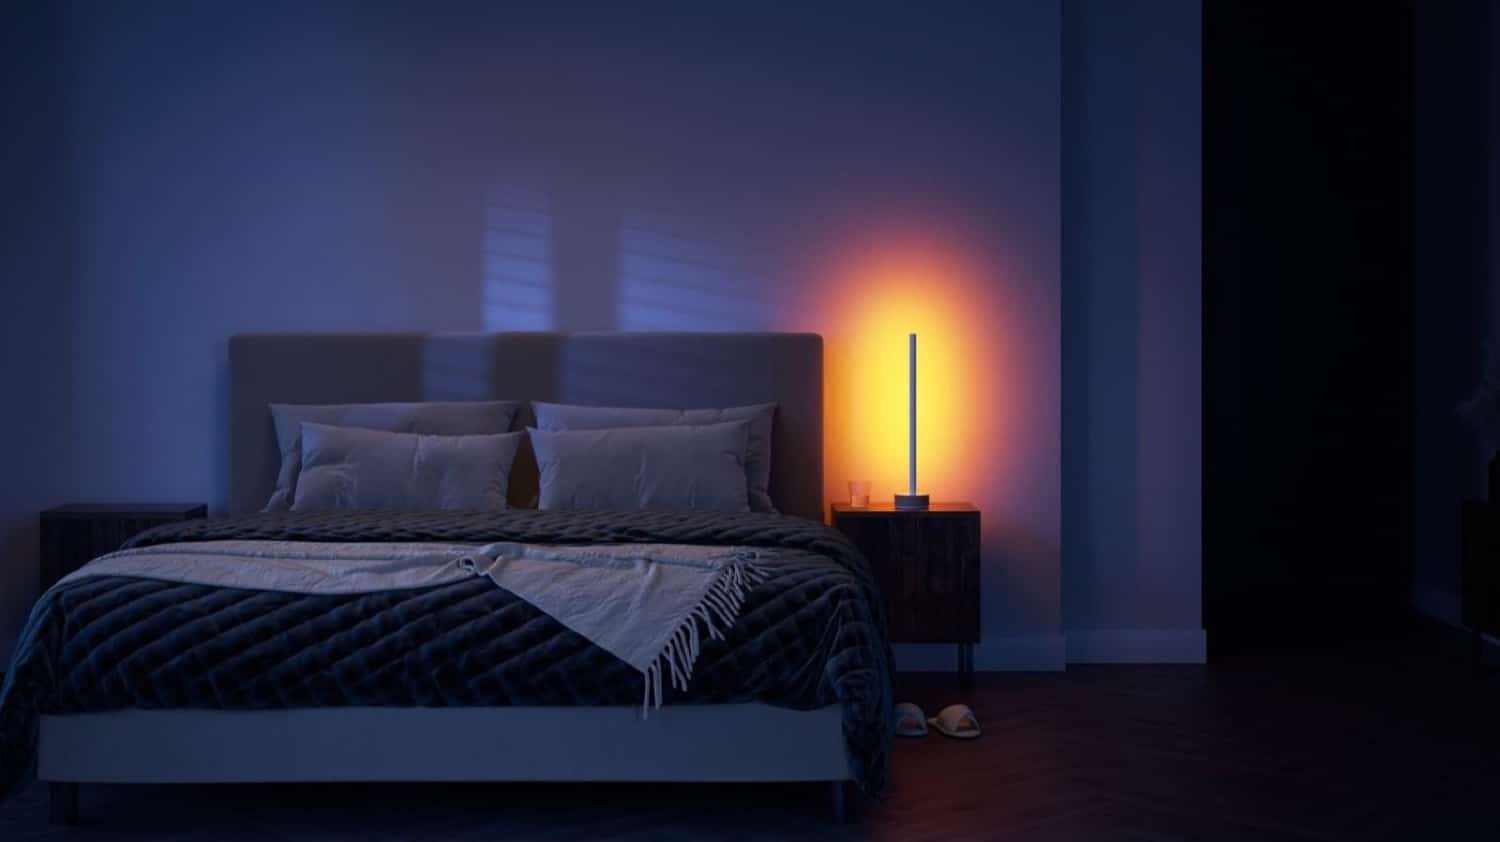 Hueblog: Philips Hue on the bedside table: Not yet a perfect solution